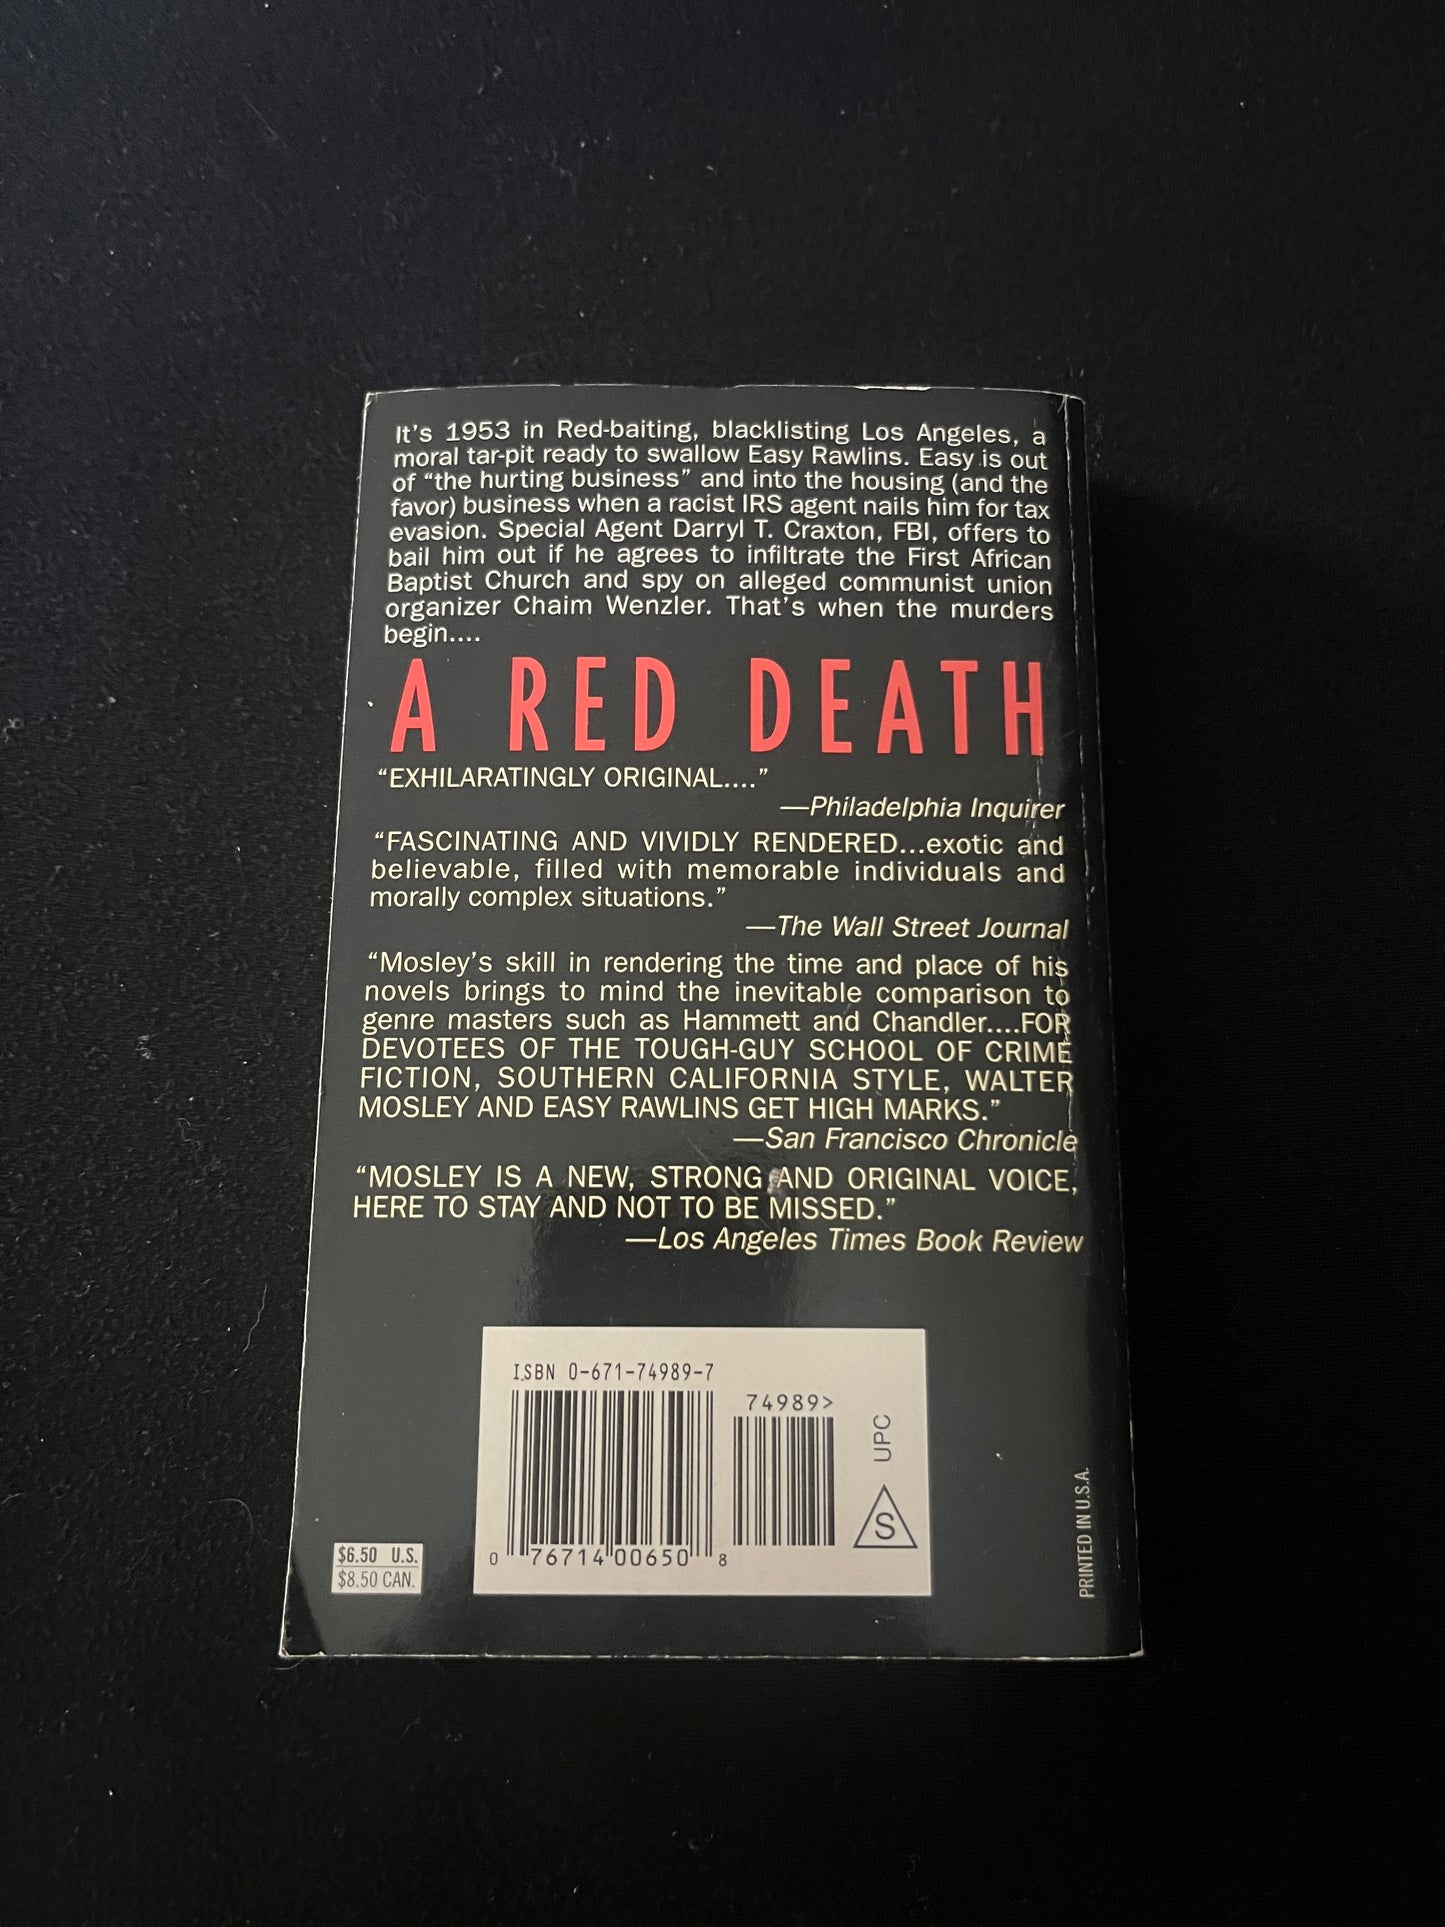 A RED DEATH by Walter Mosley